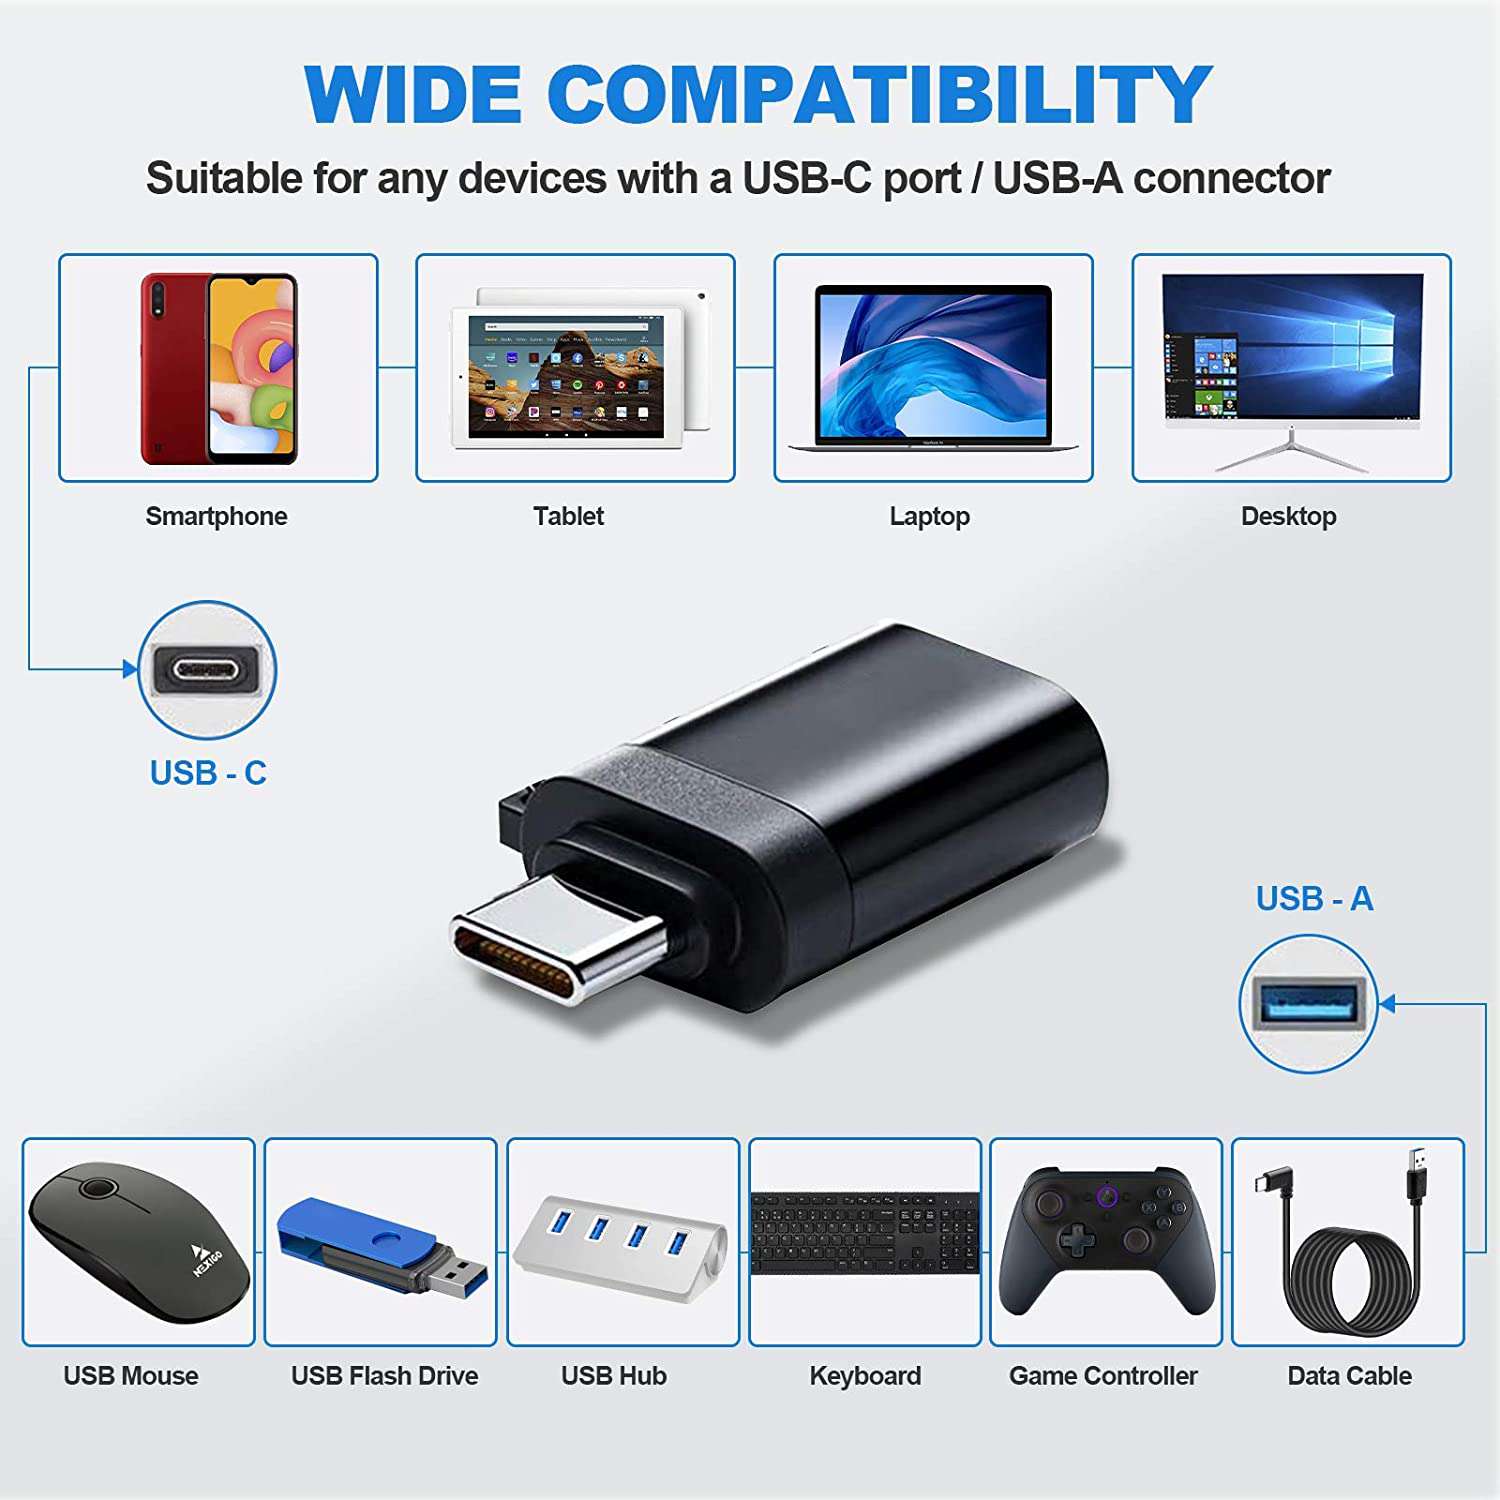 Wide compatibility: USB-C for smartphones, desktops, laptops; USB-A for mice, HDDs, keyboards, etc